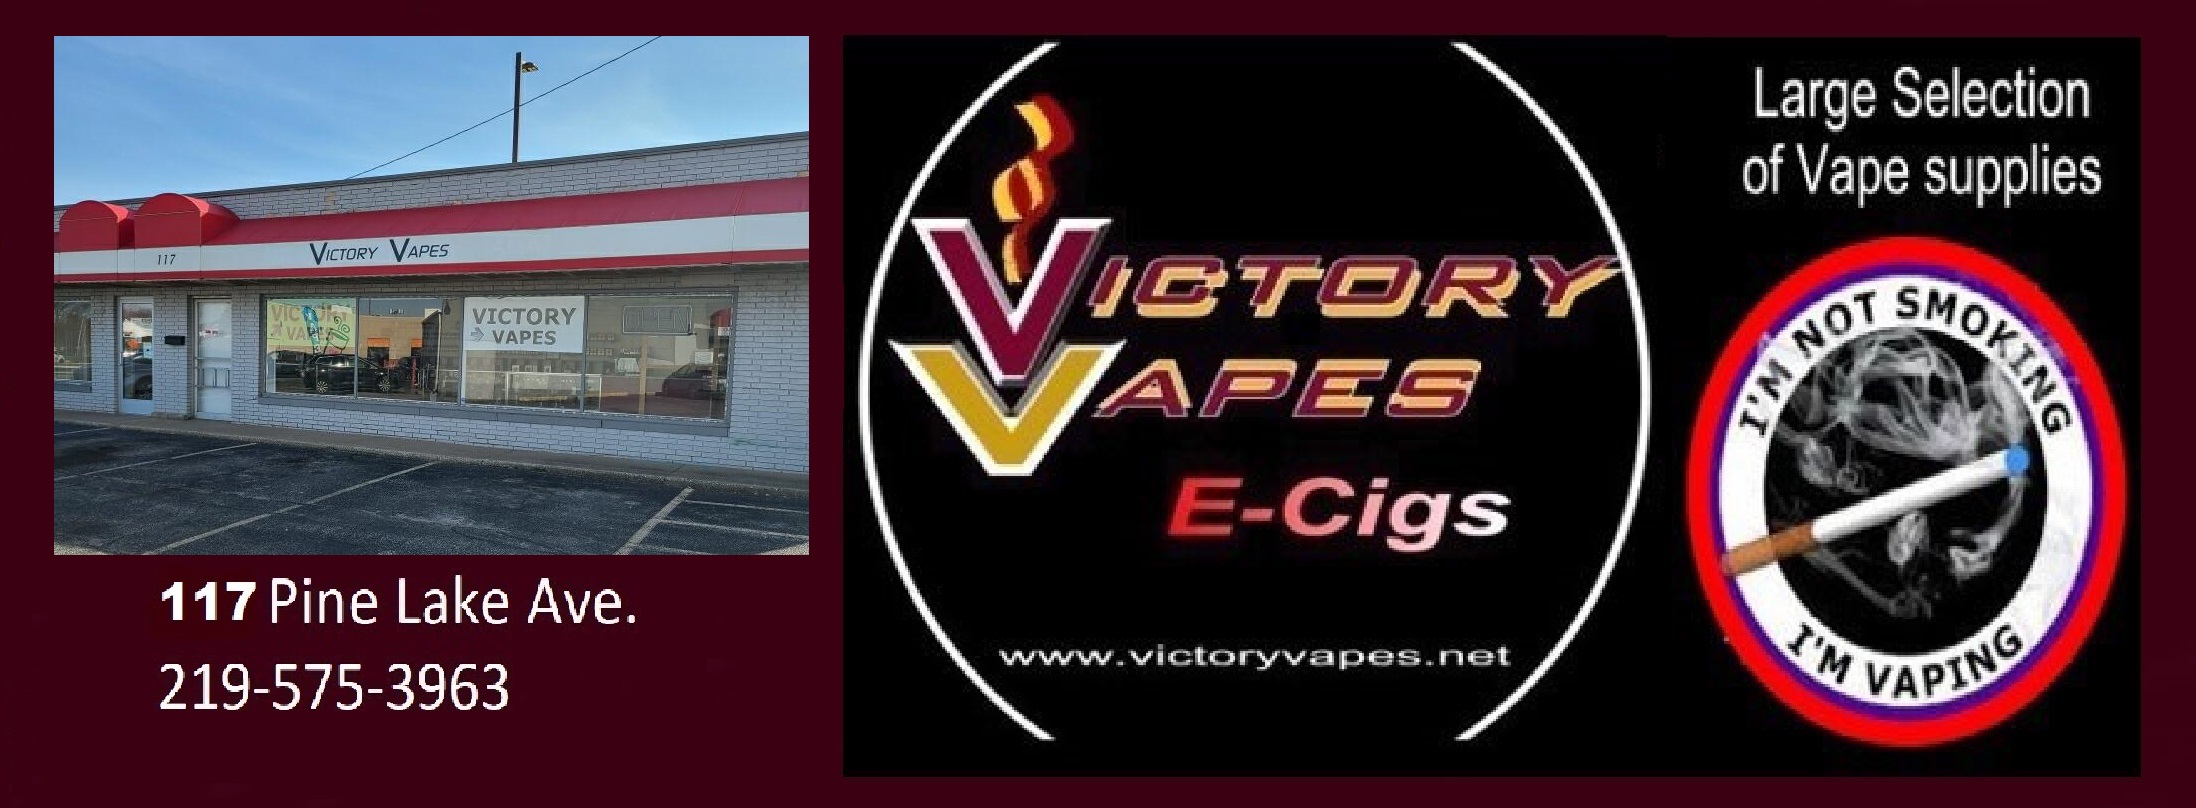 Image of with Victory Vapes information, and store location information.